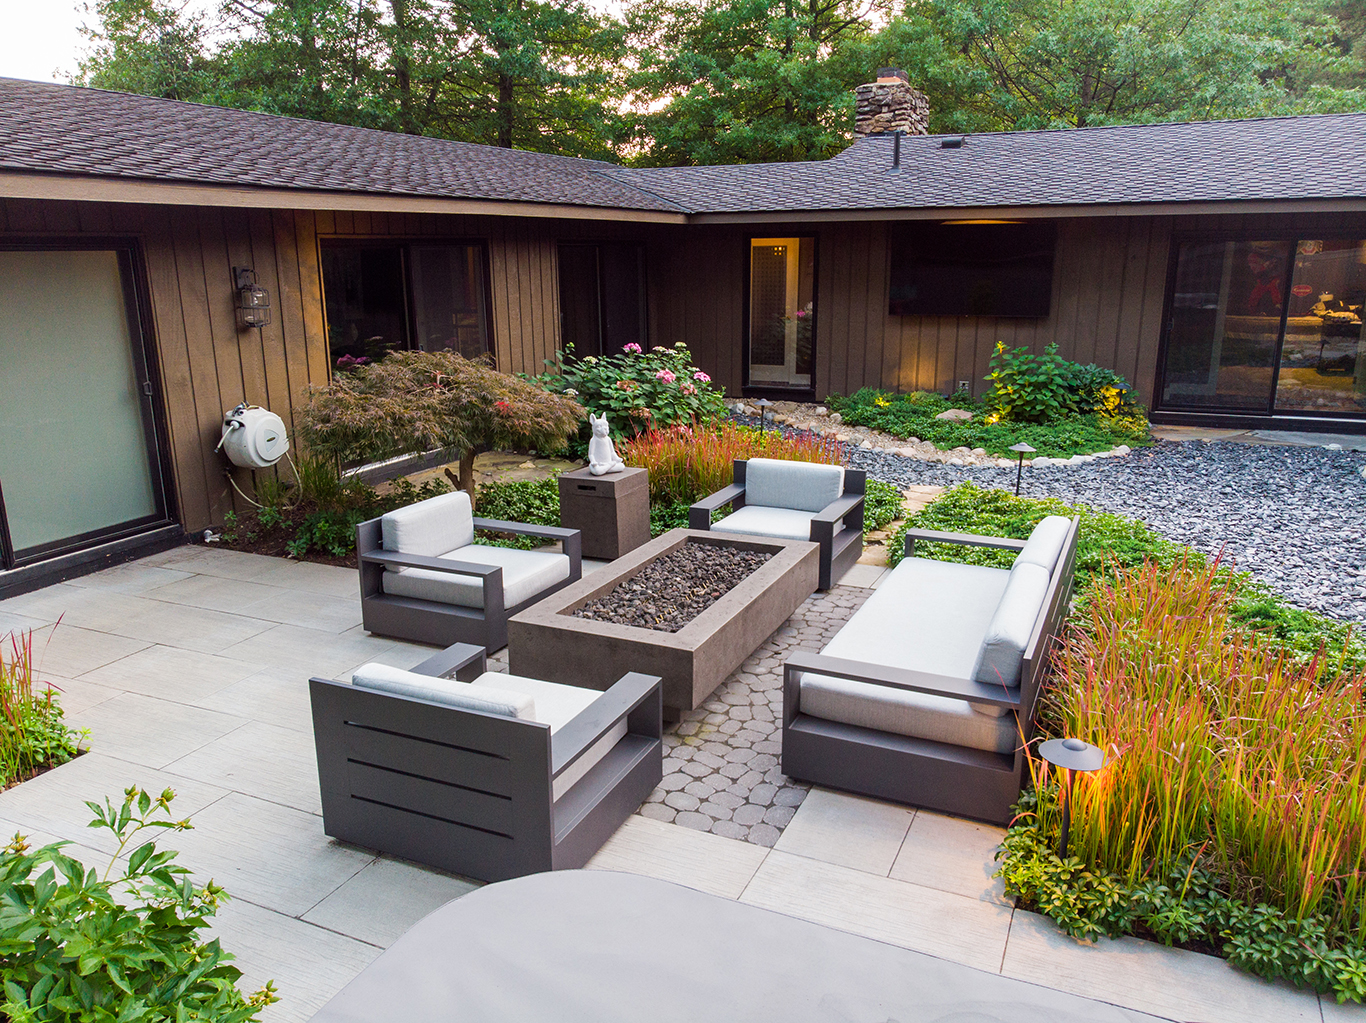 Five Things to Consider When Choosing Patio Furniture